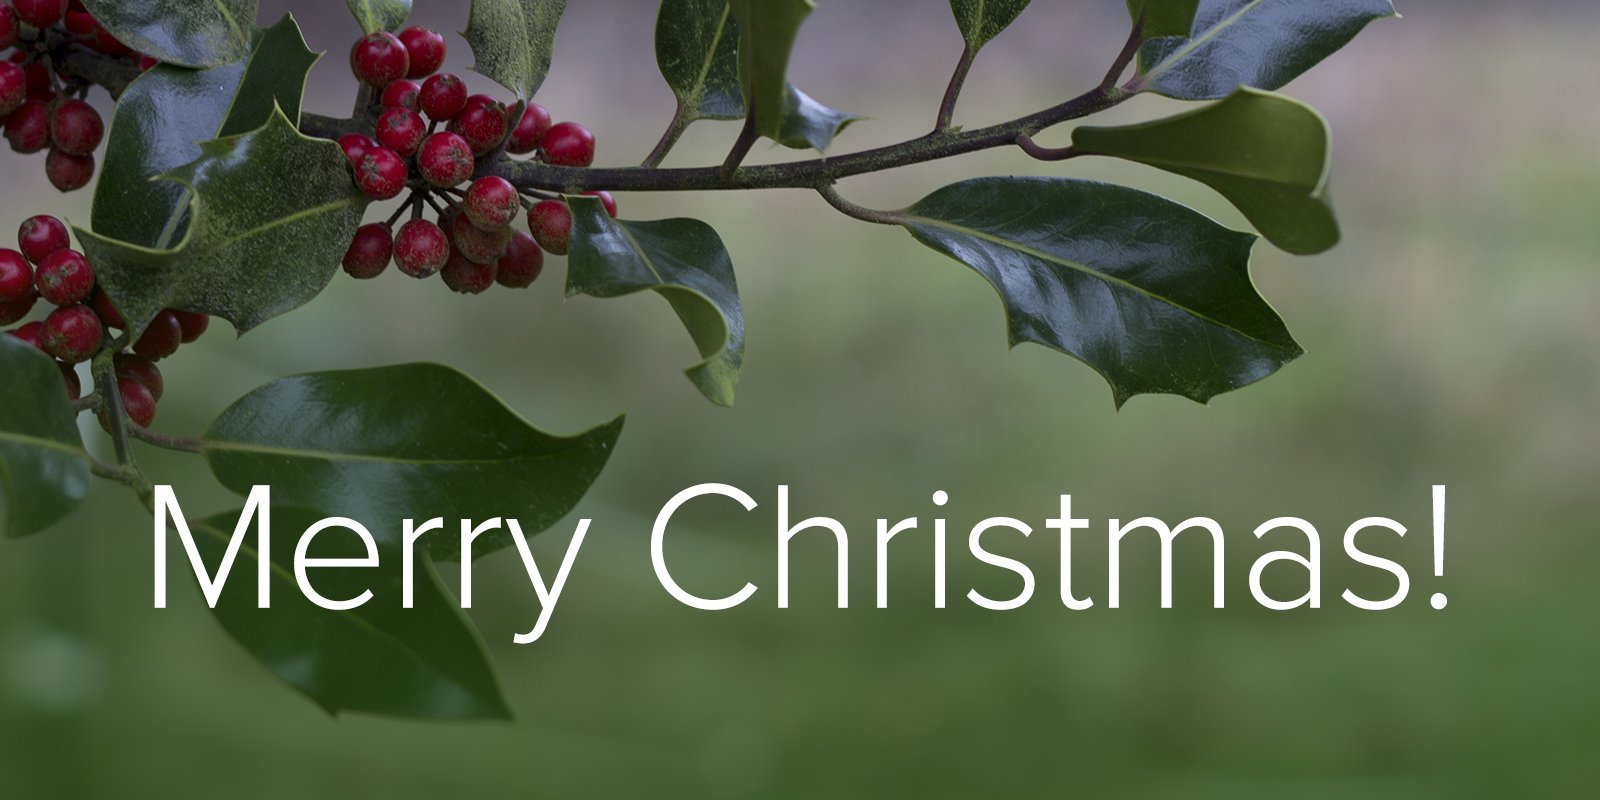 Merry Christmas from JTech!